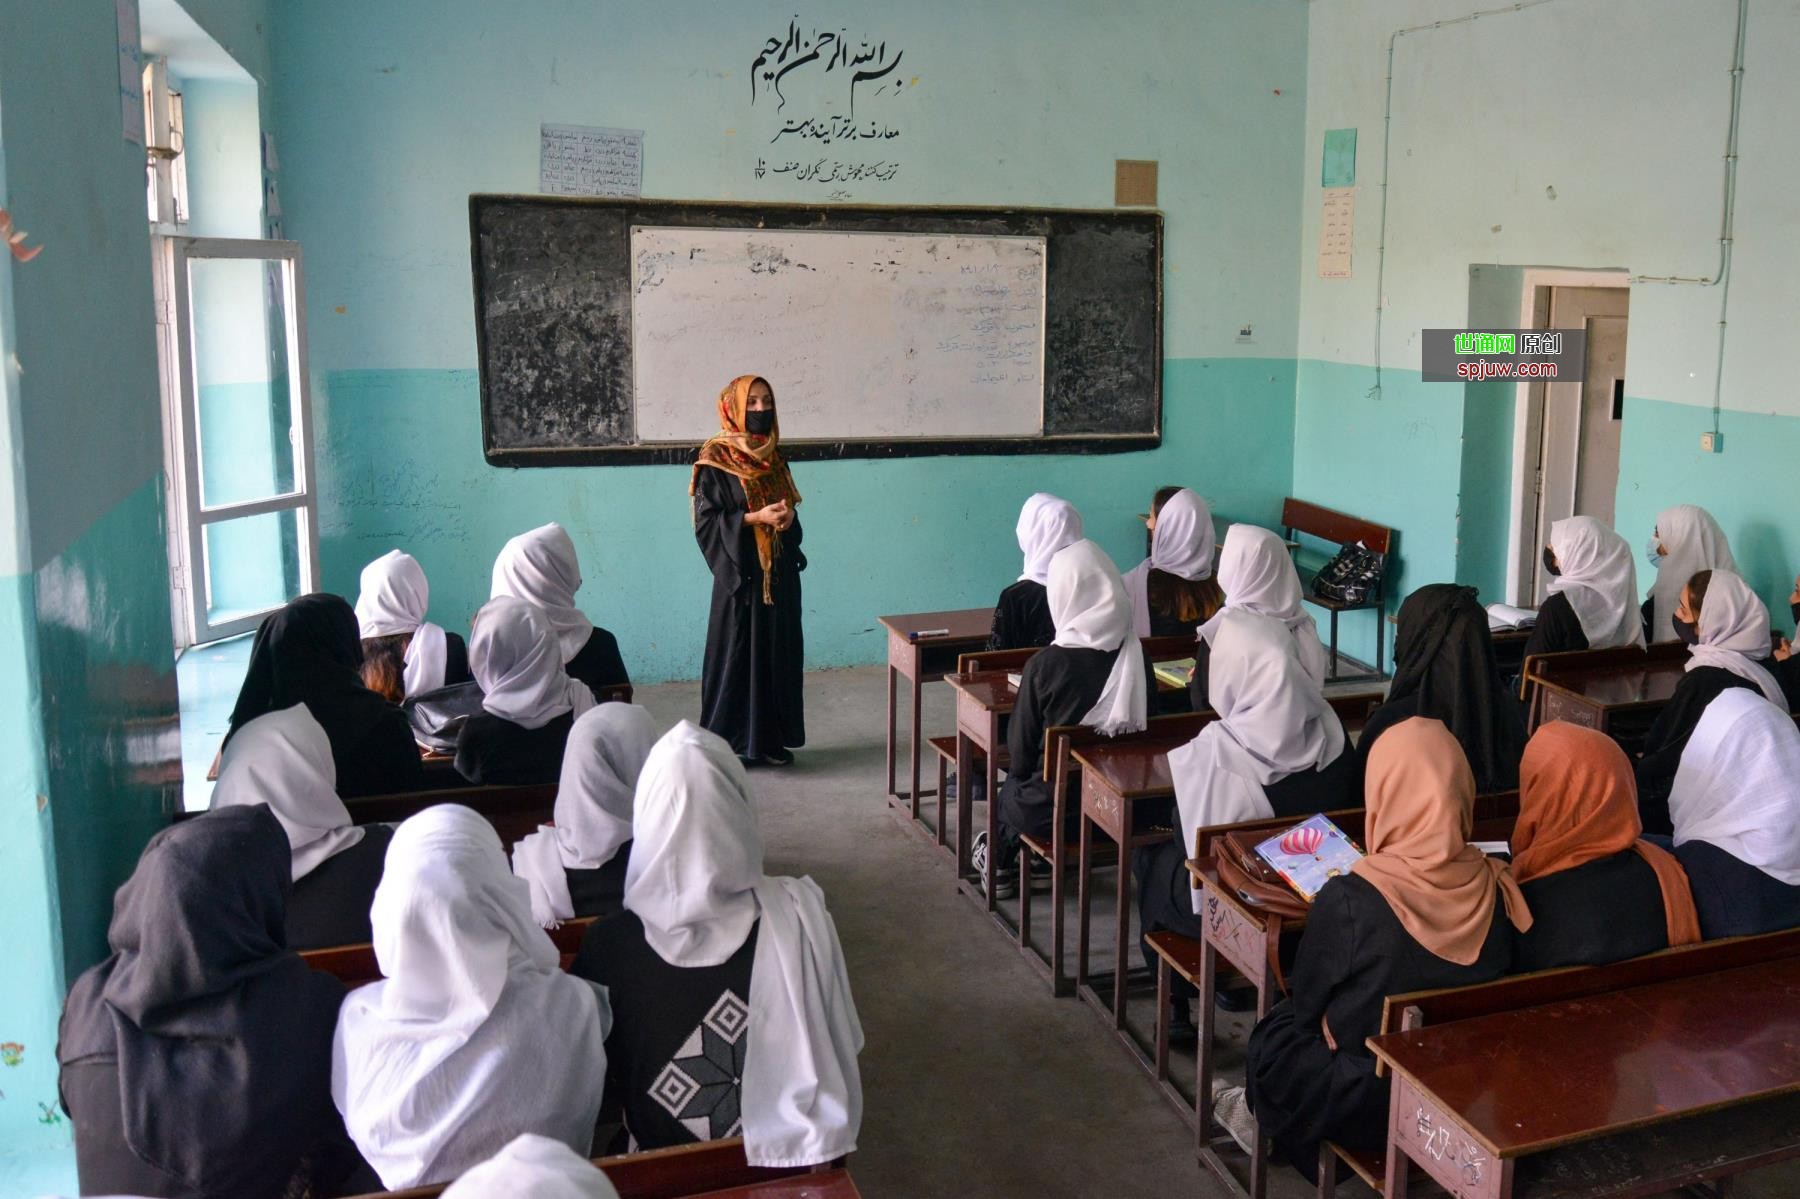 Girls attend a class after their school reopened in Kabul, Afghanistan, March 23, 2022. (AFP File Photo)